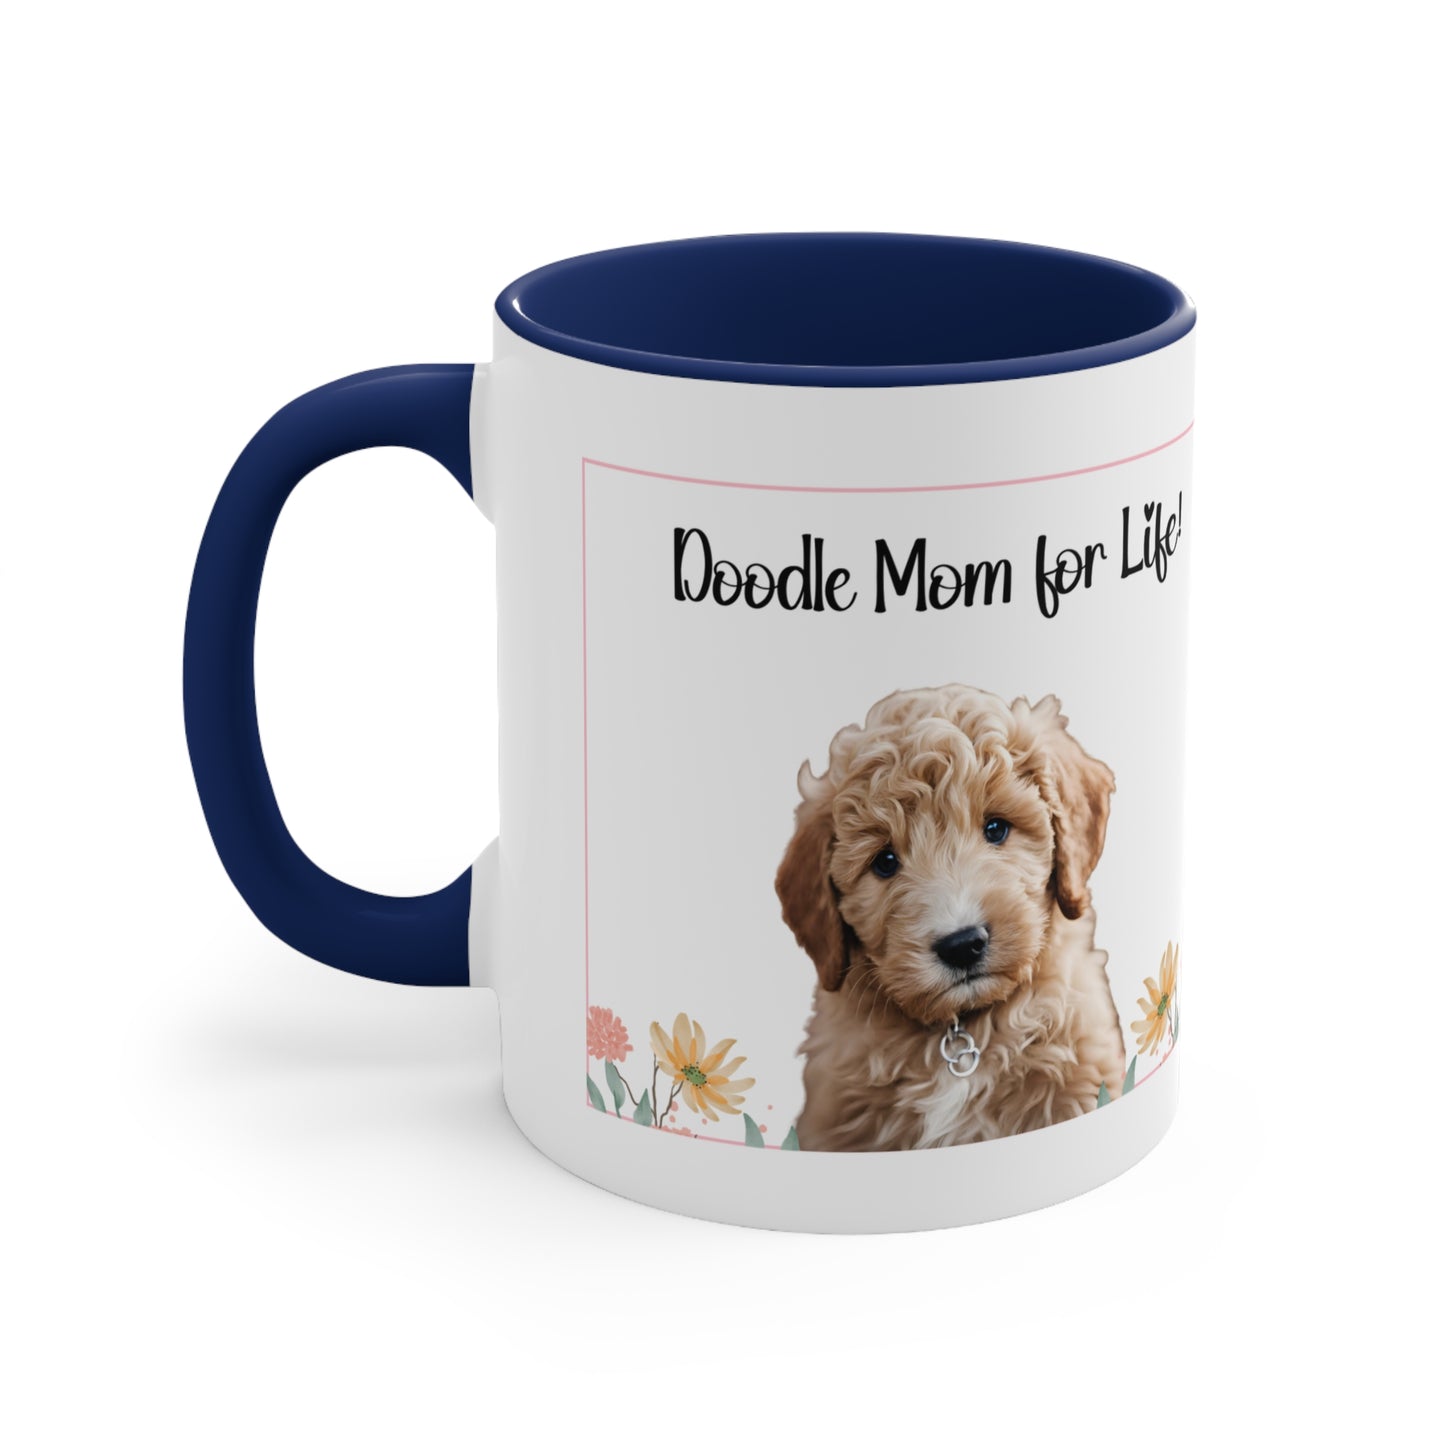 Golden doodle coffee mug, 11 oz hor gift or self, front view in dark blue.